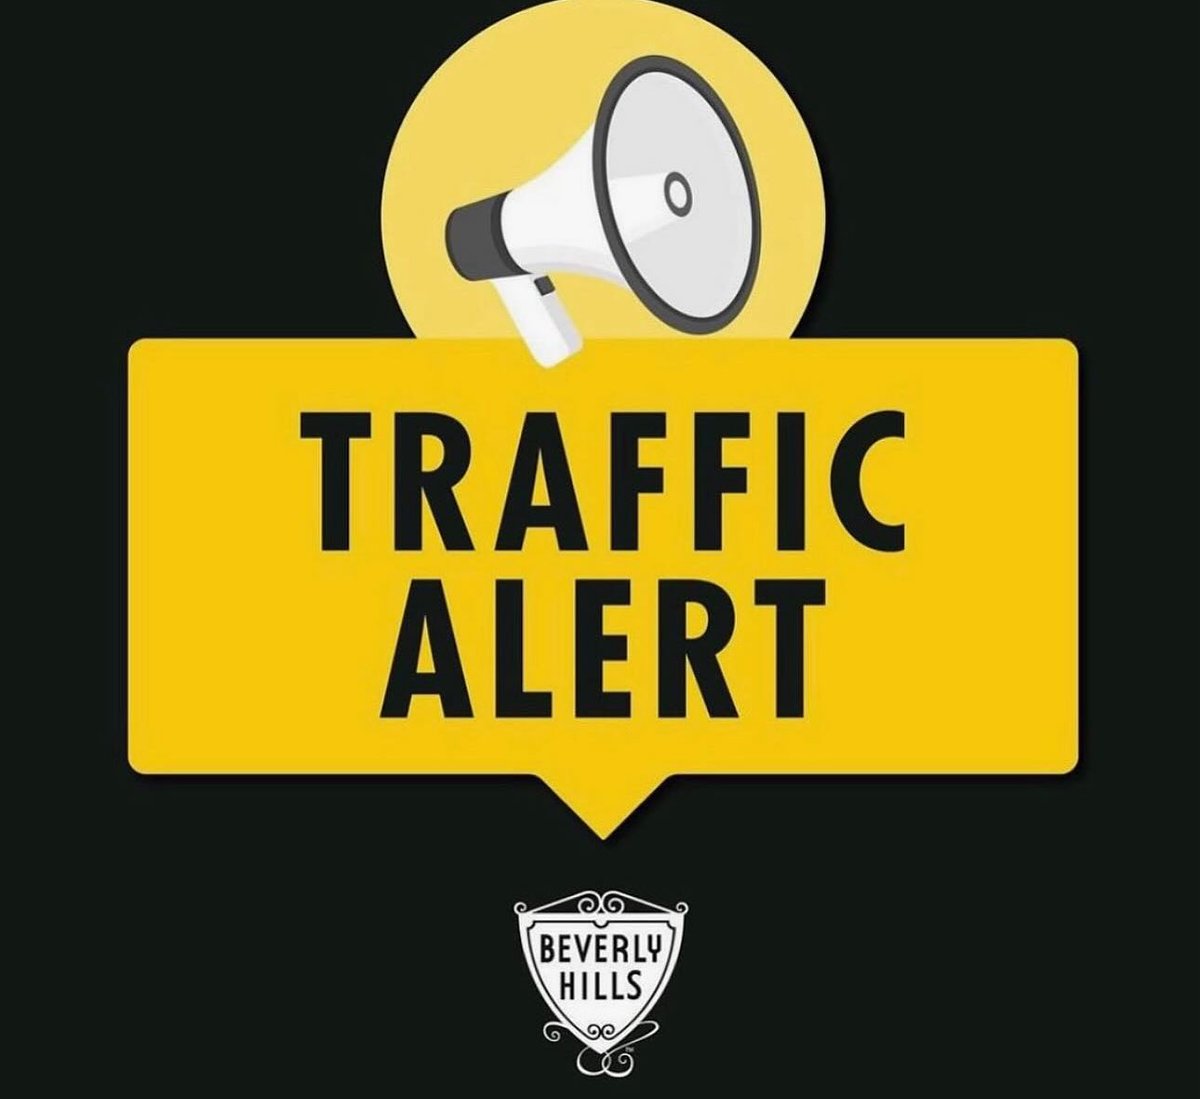 8:32 pm - Traffic Advisory: Lane closures on N Santa Monica Blvd between Beverly Dr. and Rexford Dr. Use alternate routes.